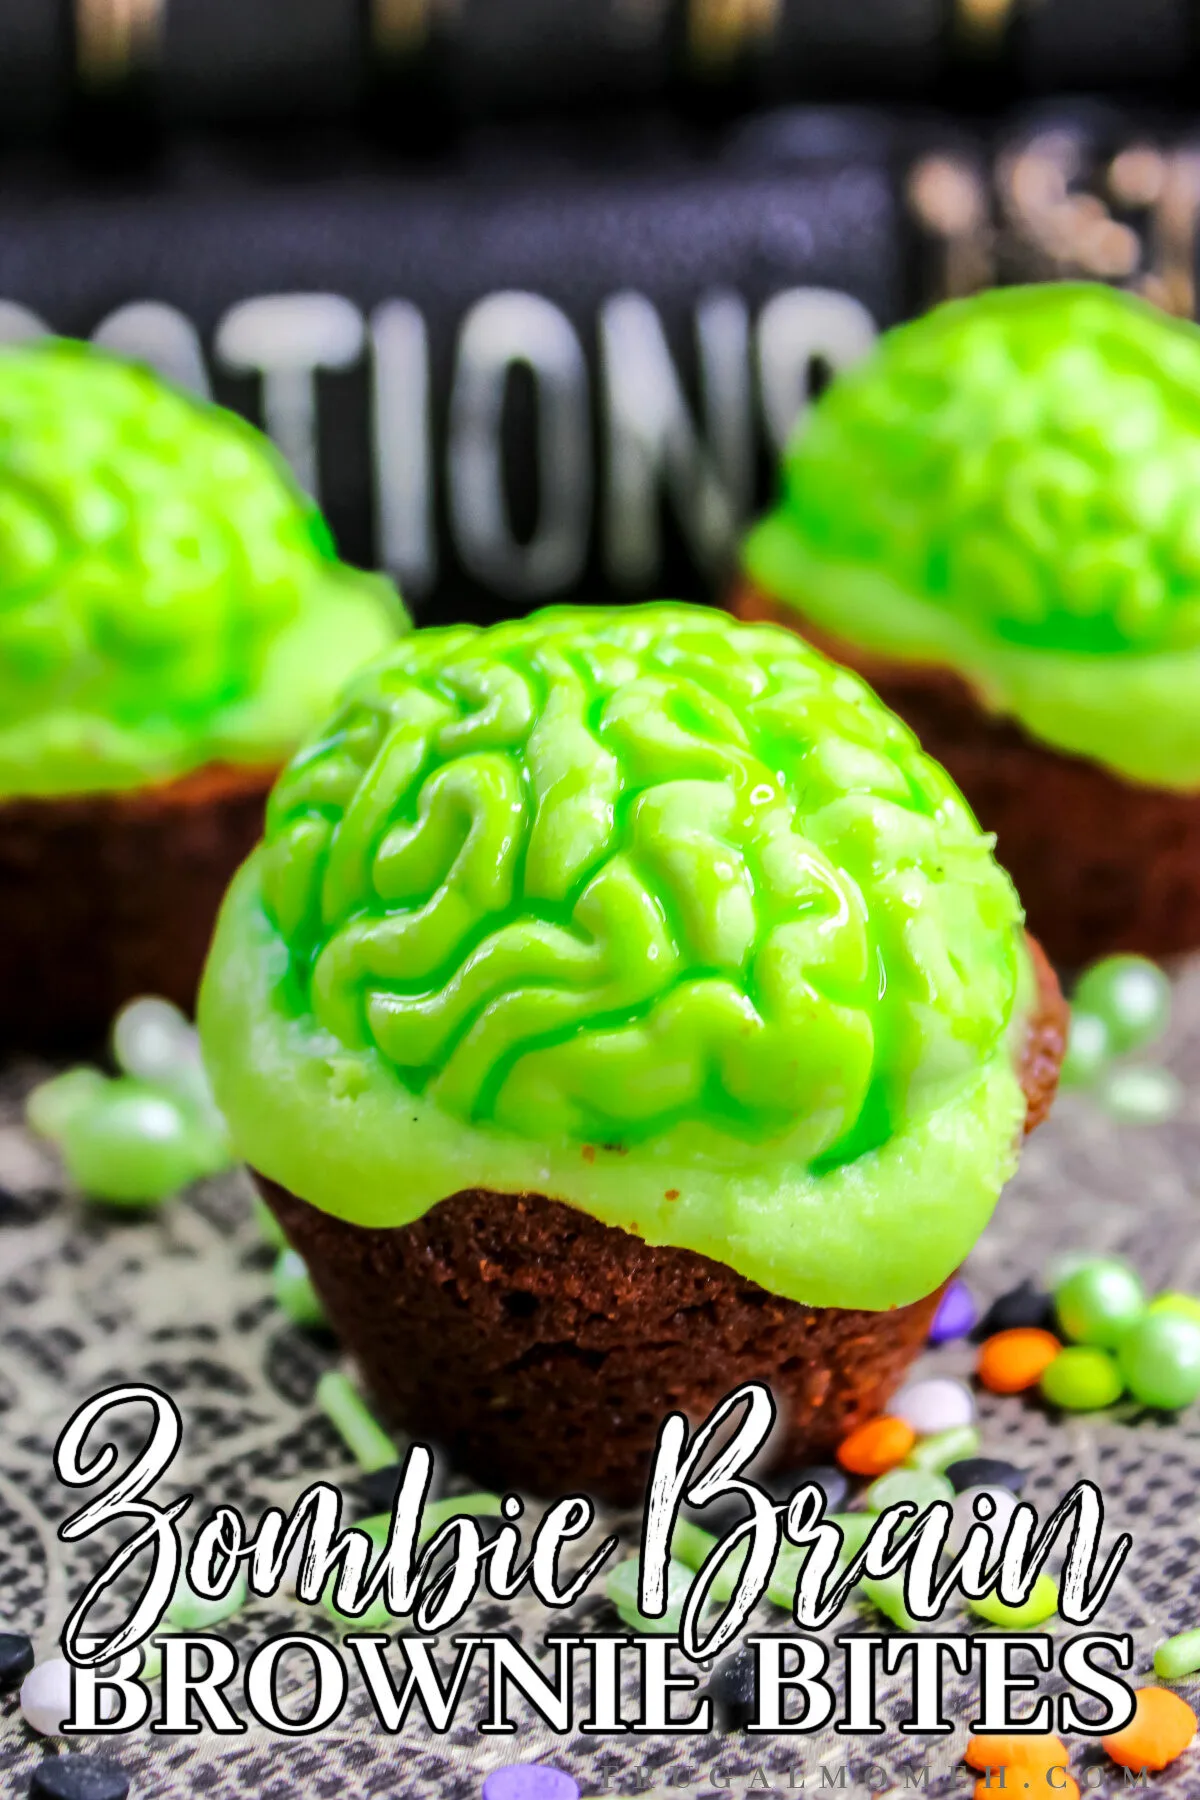 These spooky zombie brain brownie bites are perfect for a Halloween party! They're easy to make and will be a hit with kids and adults alike.